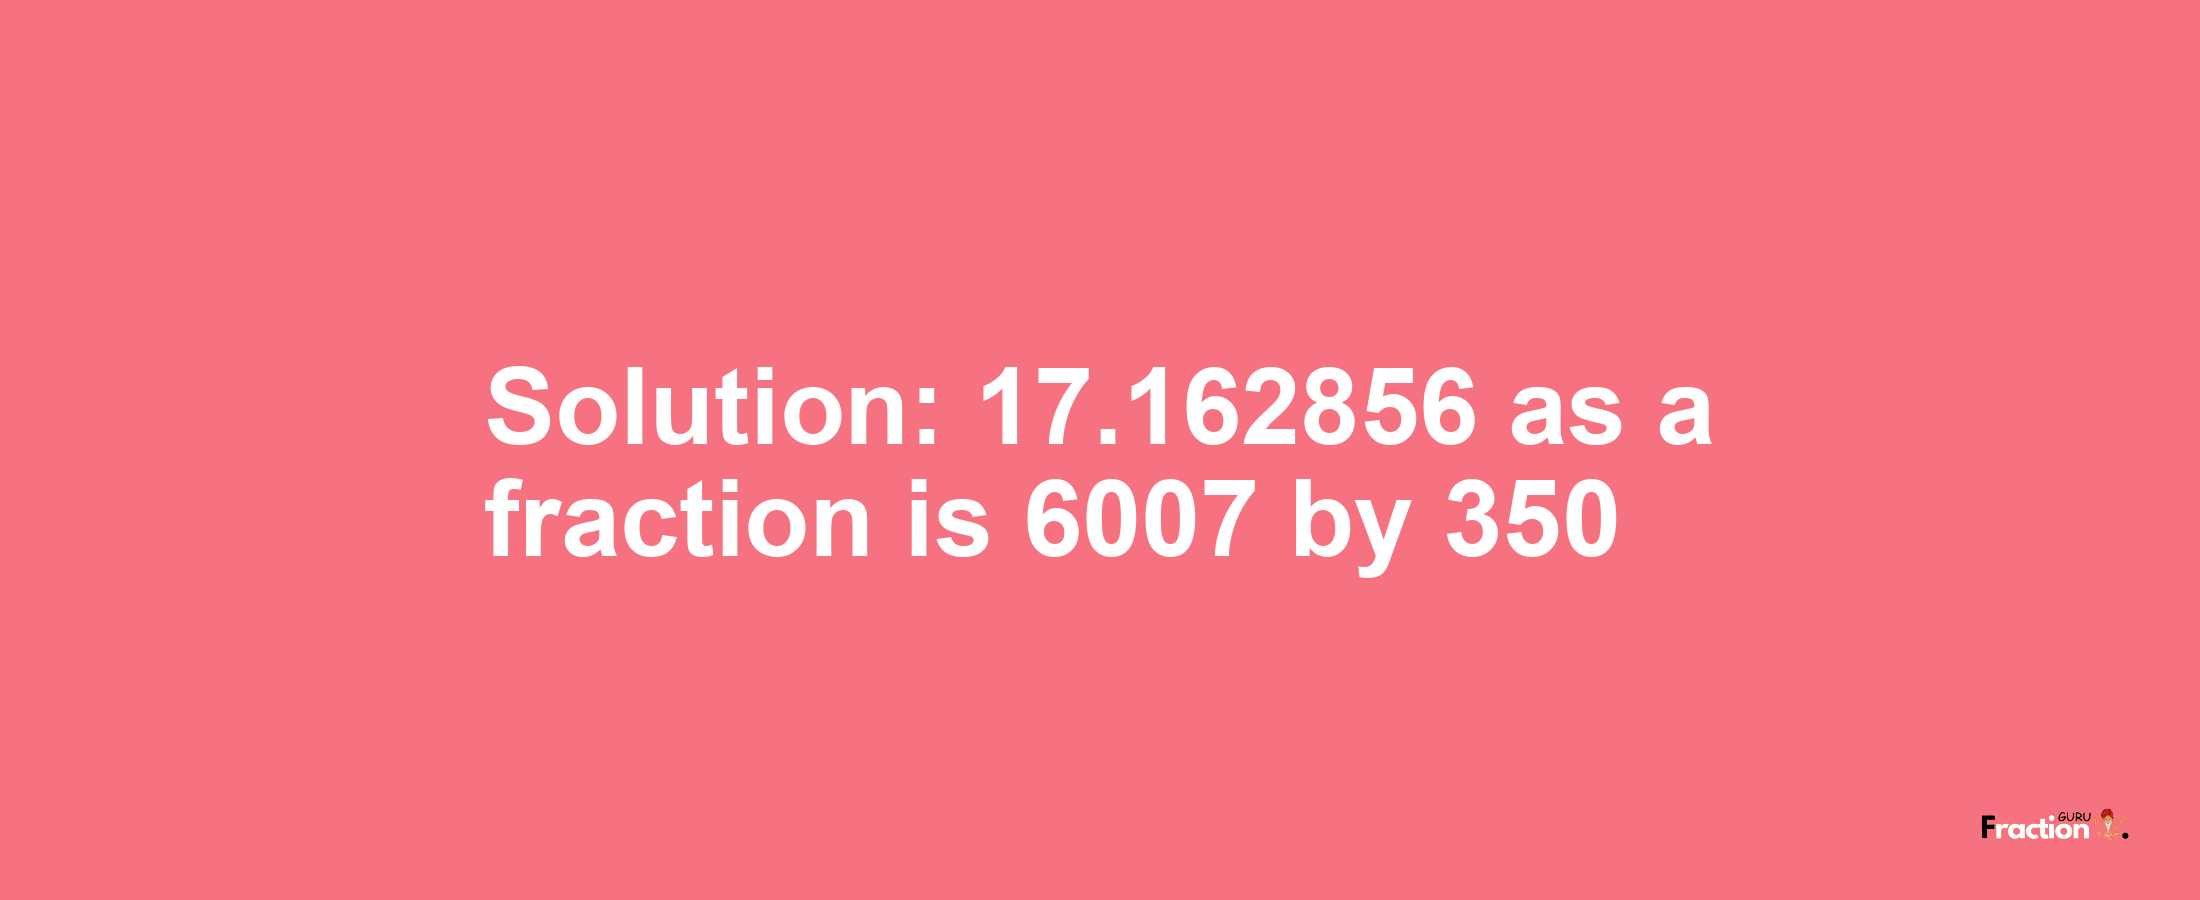 Solution:17.162856 as a fraction is 6007/350